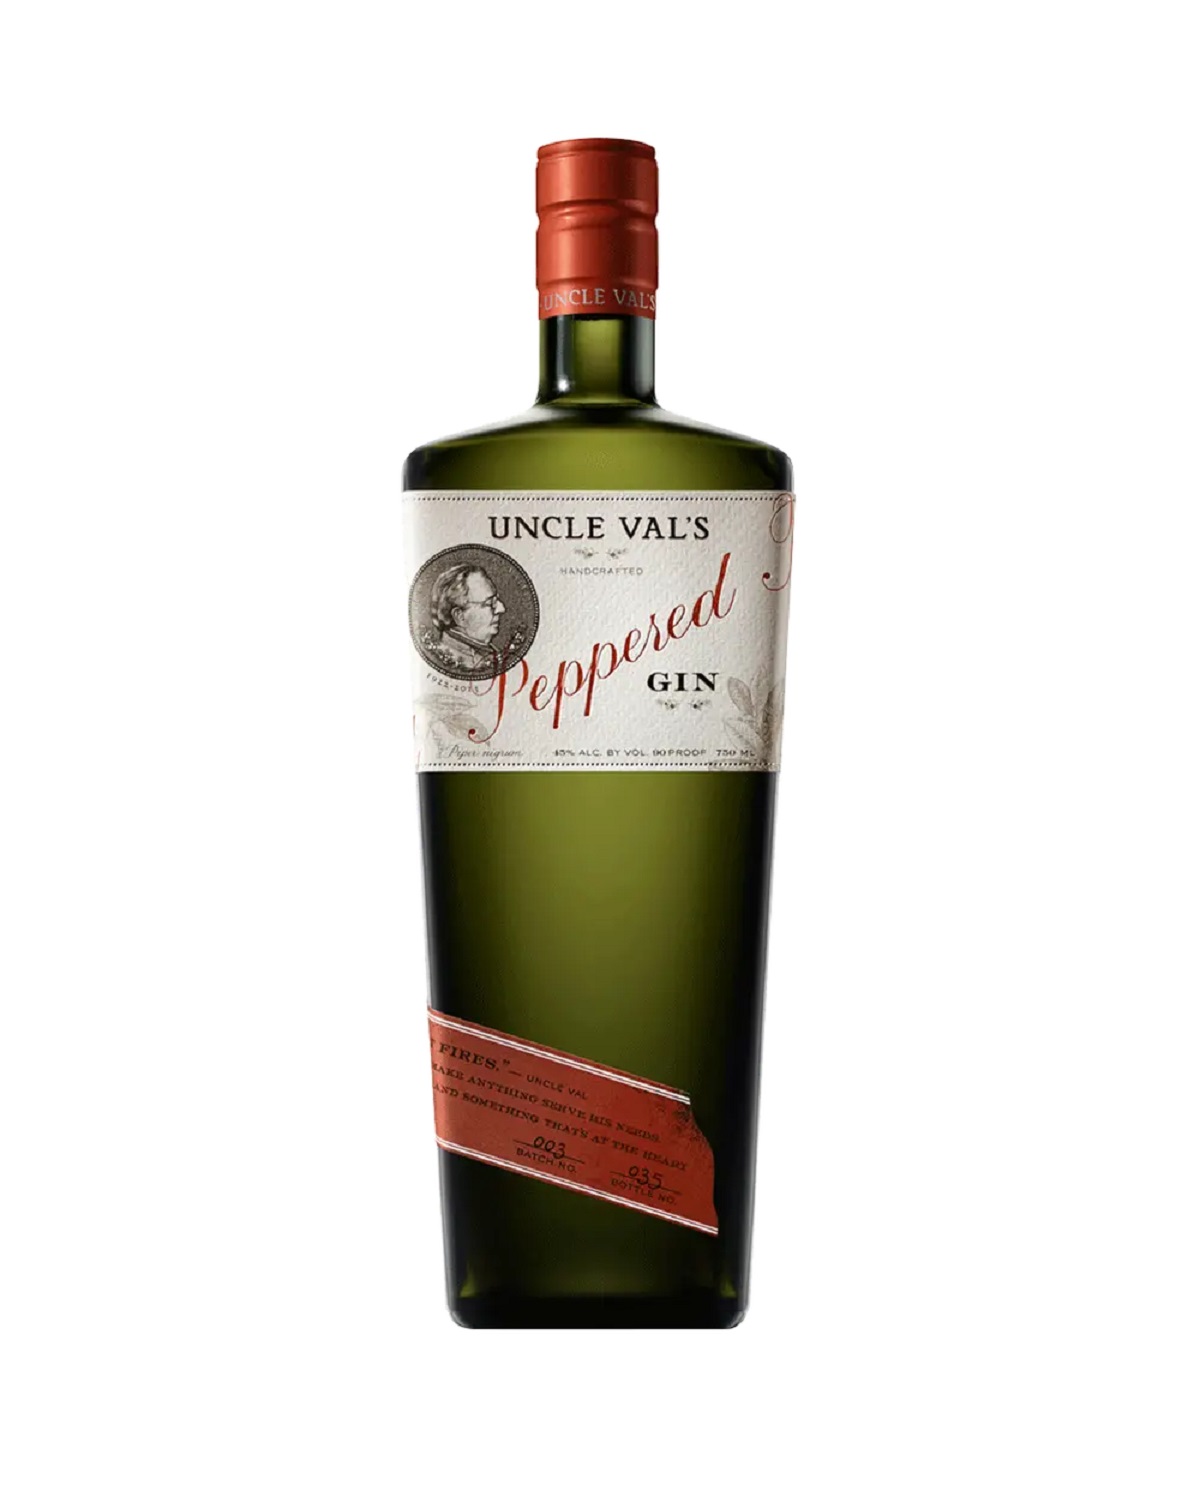 UNCLE VAL'S PEPPERED GIN 750ML